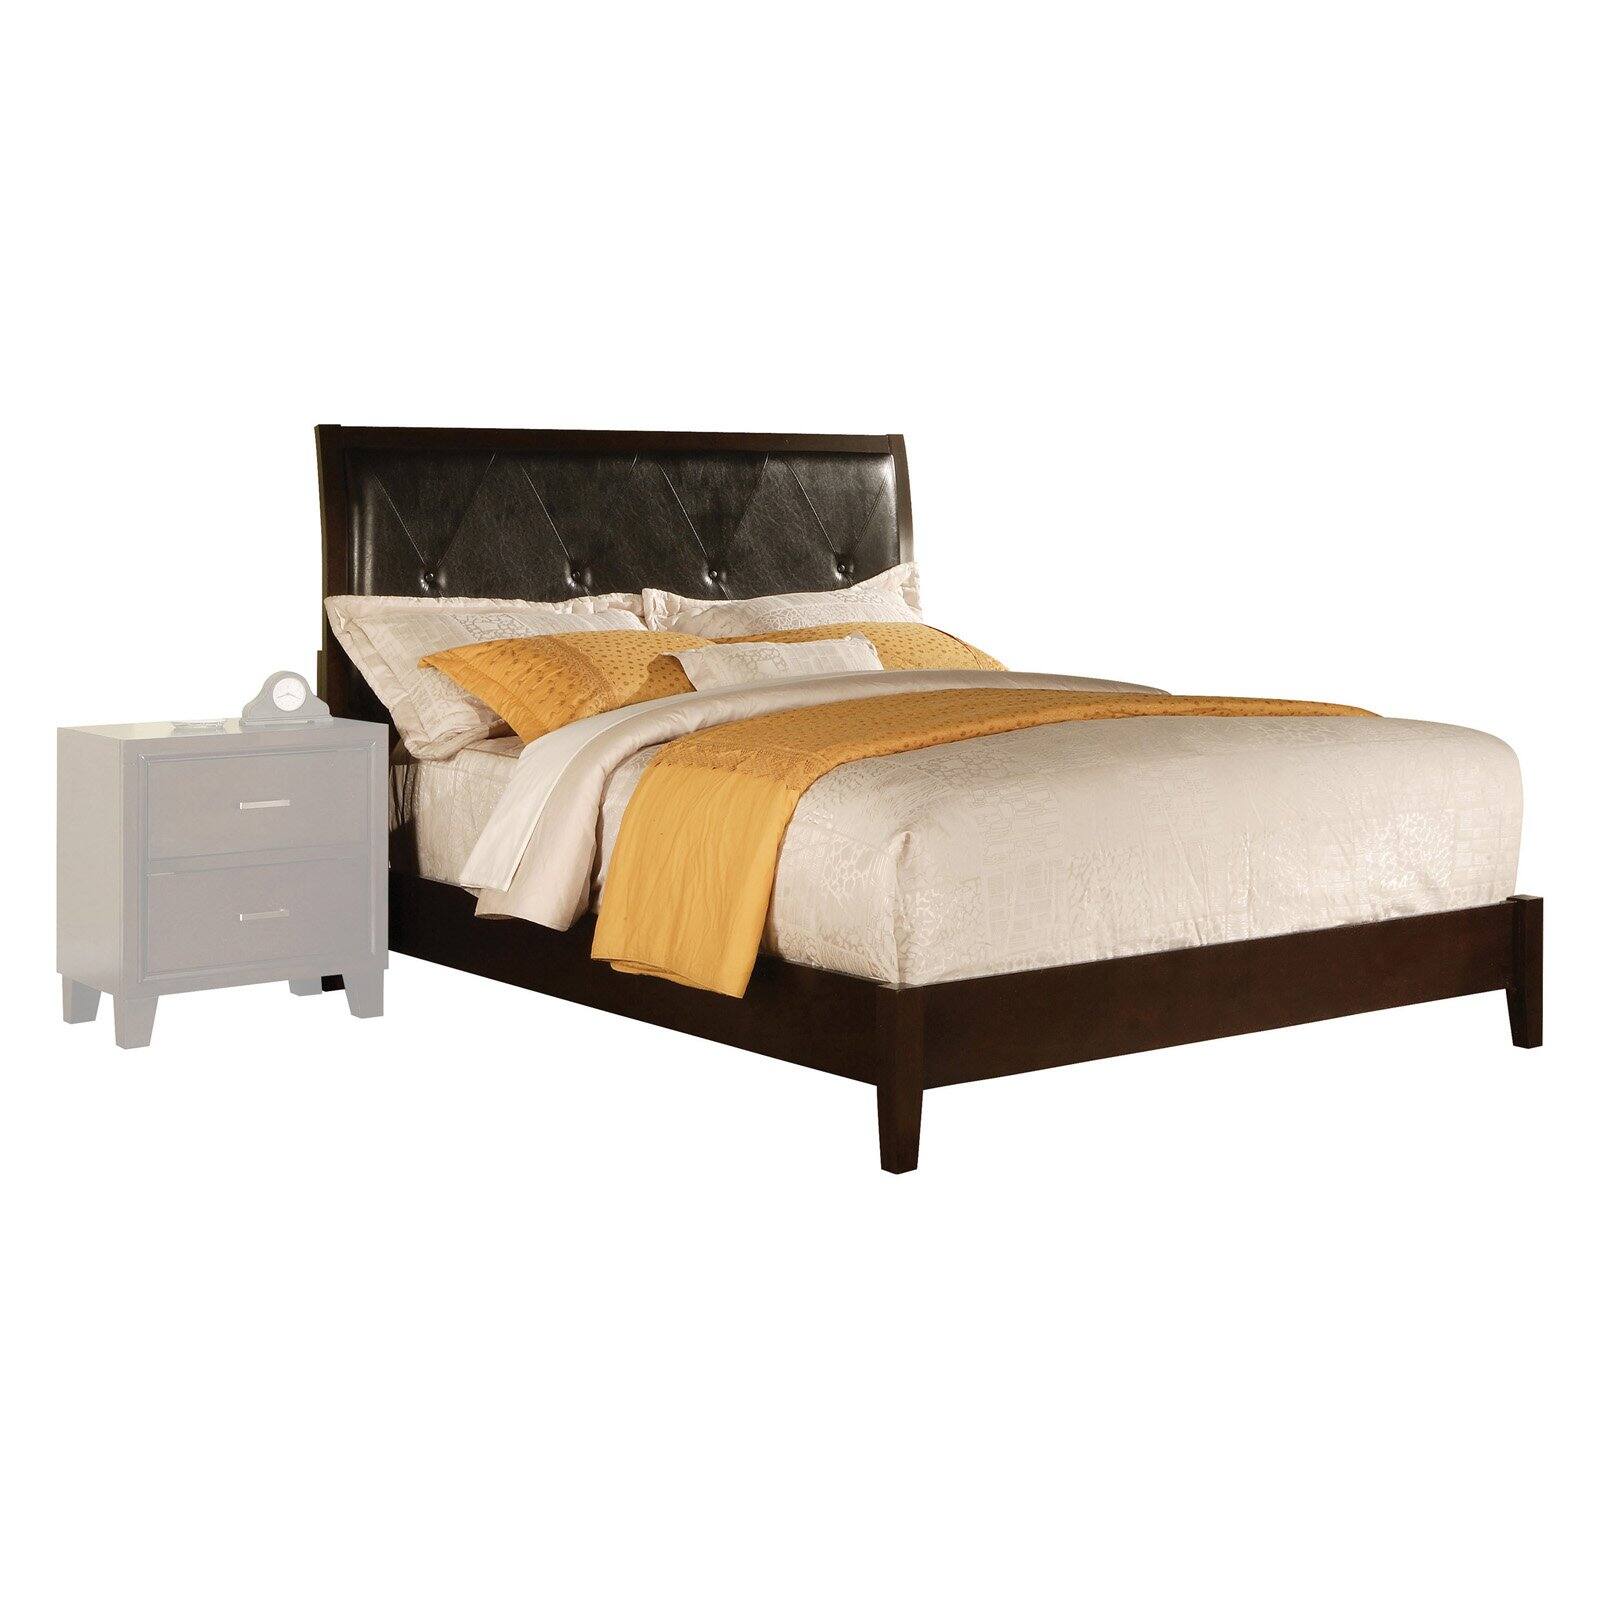 ACME Tyler Twin Bed in Black PU & Cappuccino, Multiple Sizes - image 2 of 2